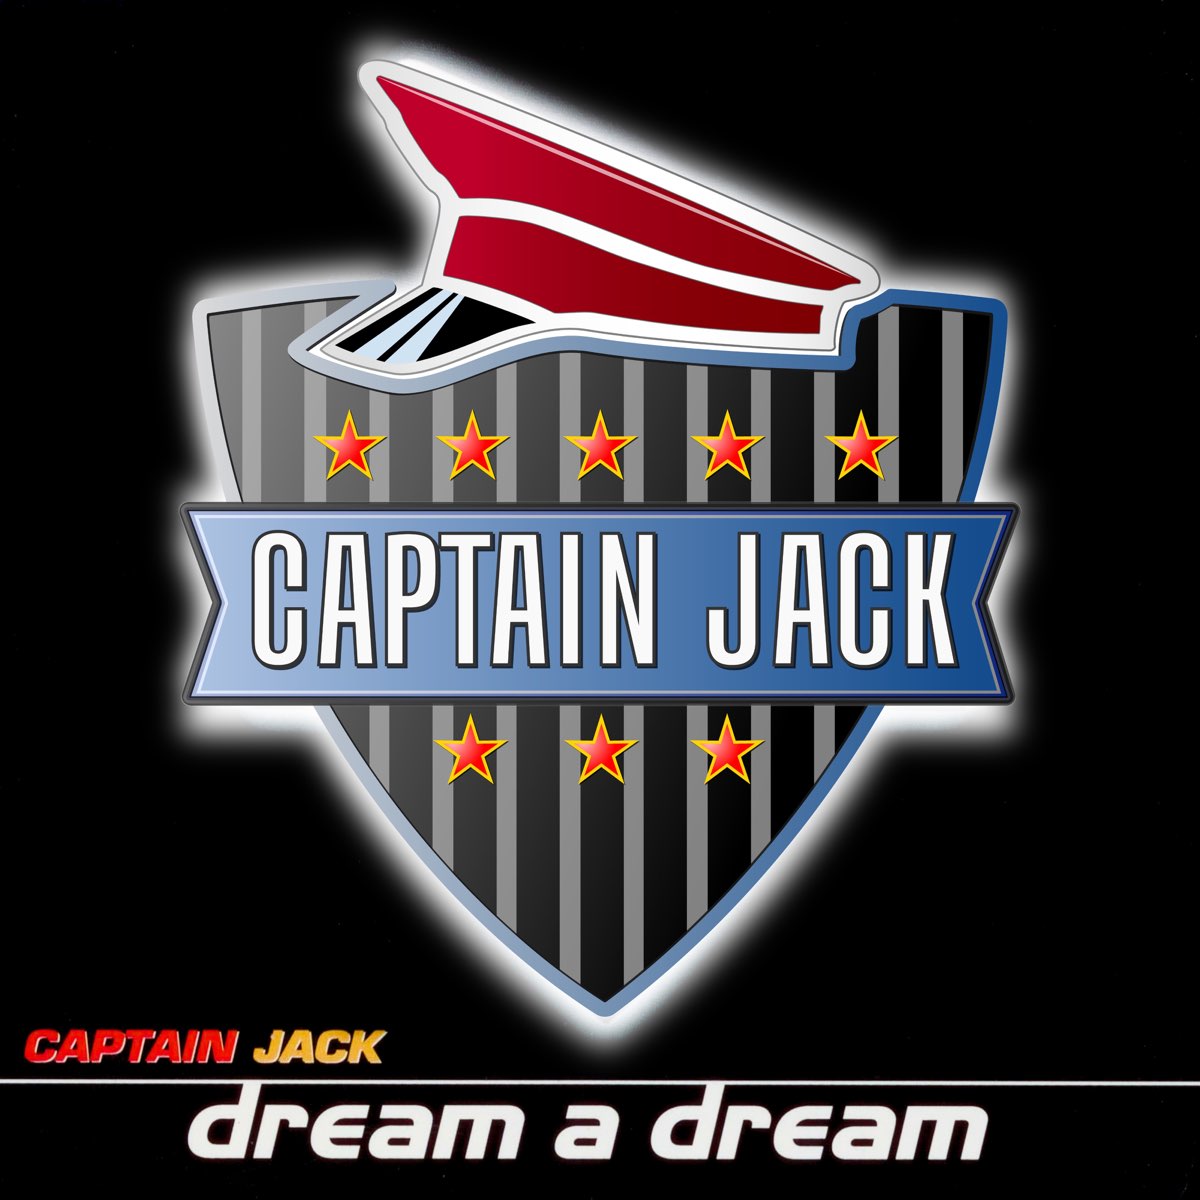 Dream a Dream - EP by Captain Jack on Apple Music